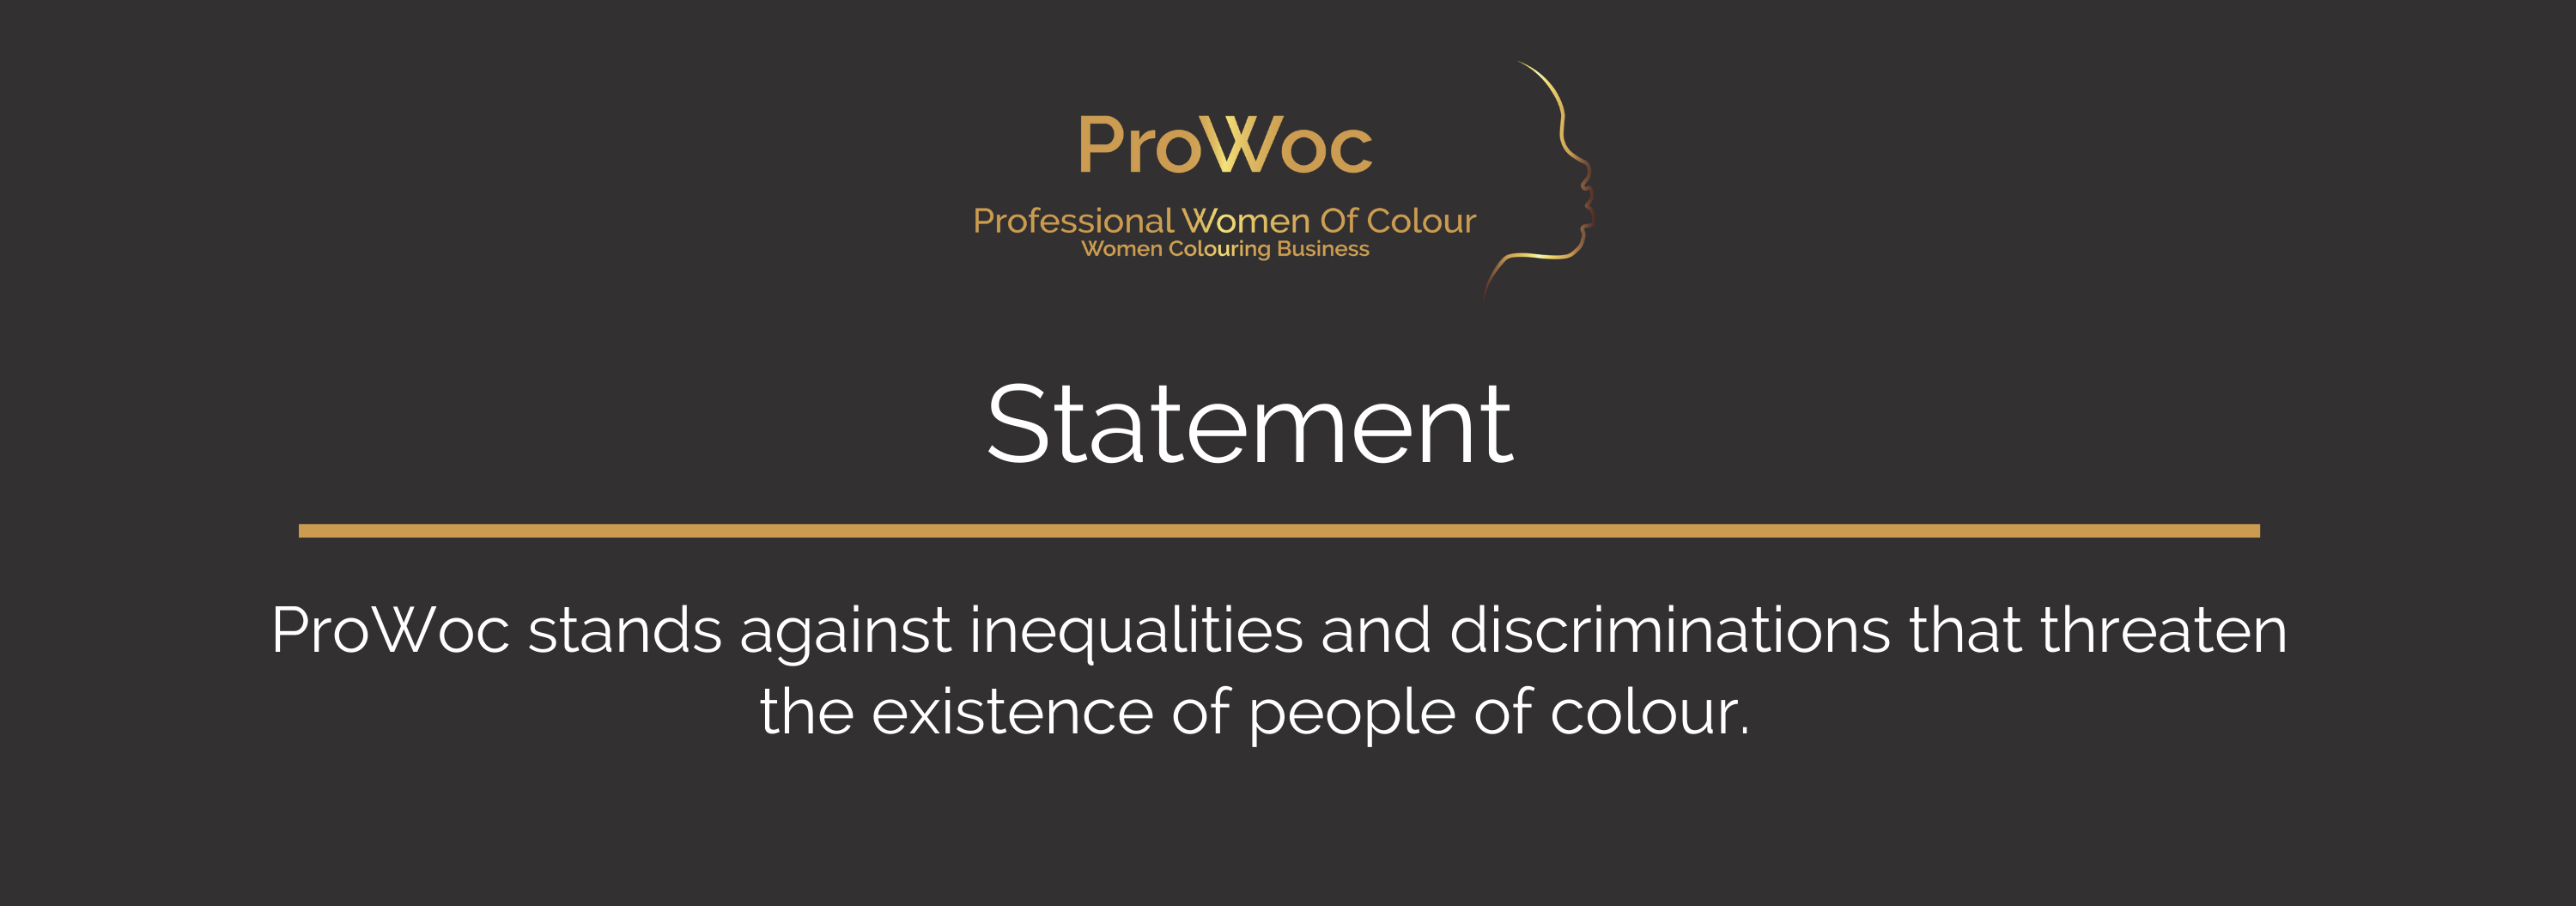 ProWoc Statement against inequalities and discriminations.